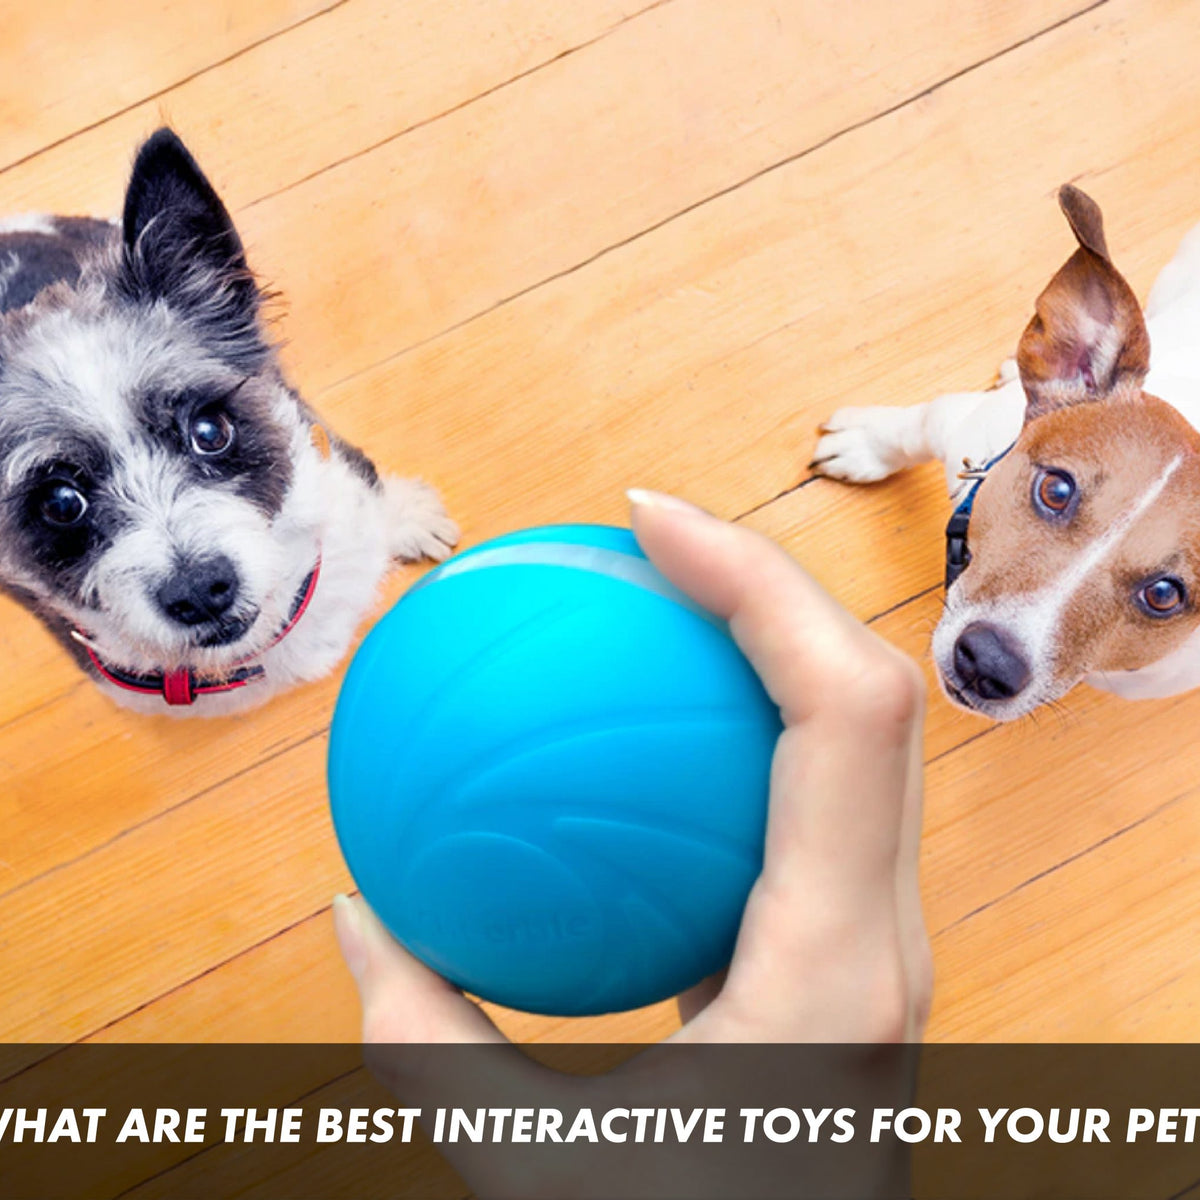 Cheerble's Wickedbone is a fun smart dog toy with a mind of its own